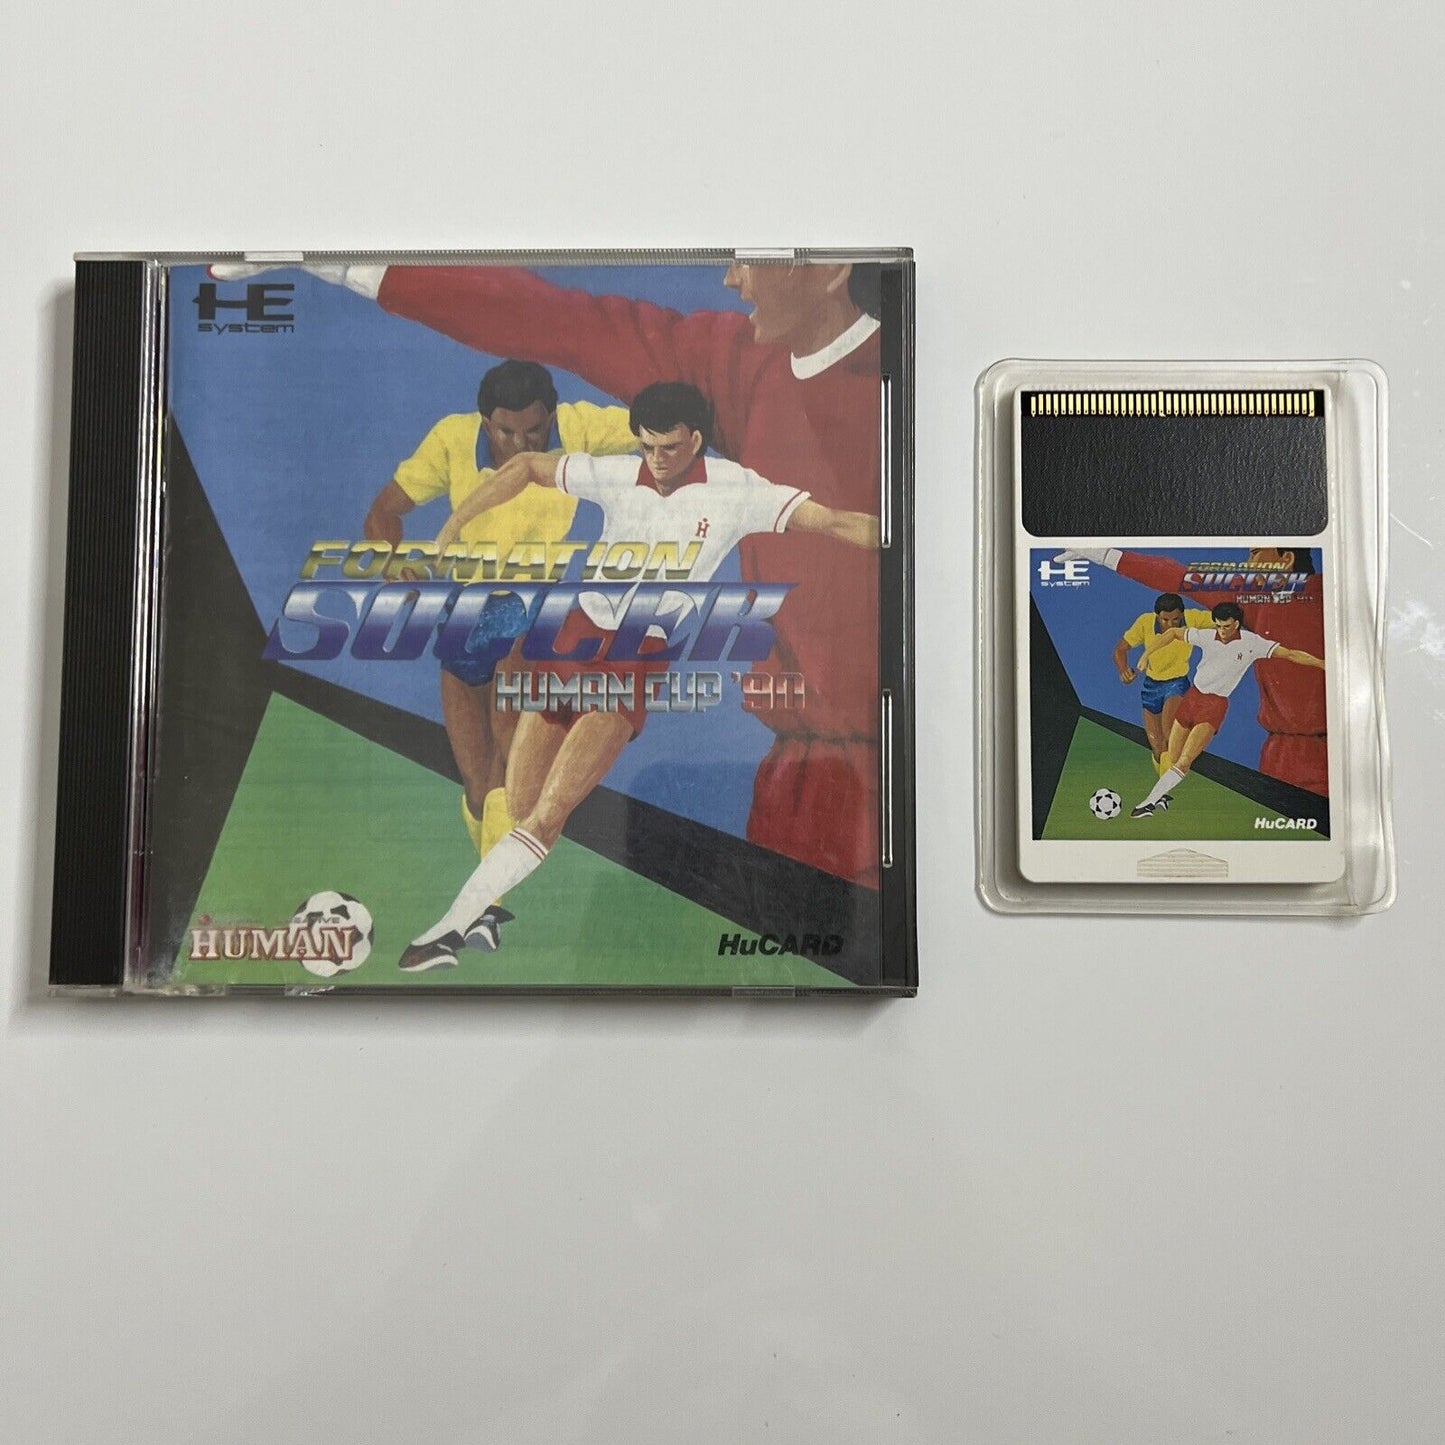 Formation Soccer Human Cup 90  PC Engine PCE NTSC-J JAPAN 1990 Game Complete